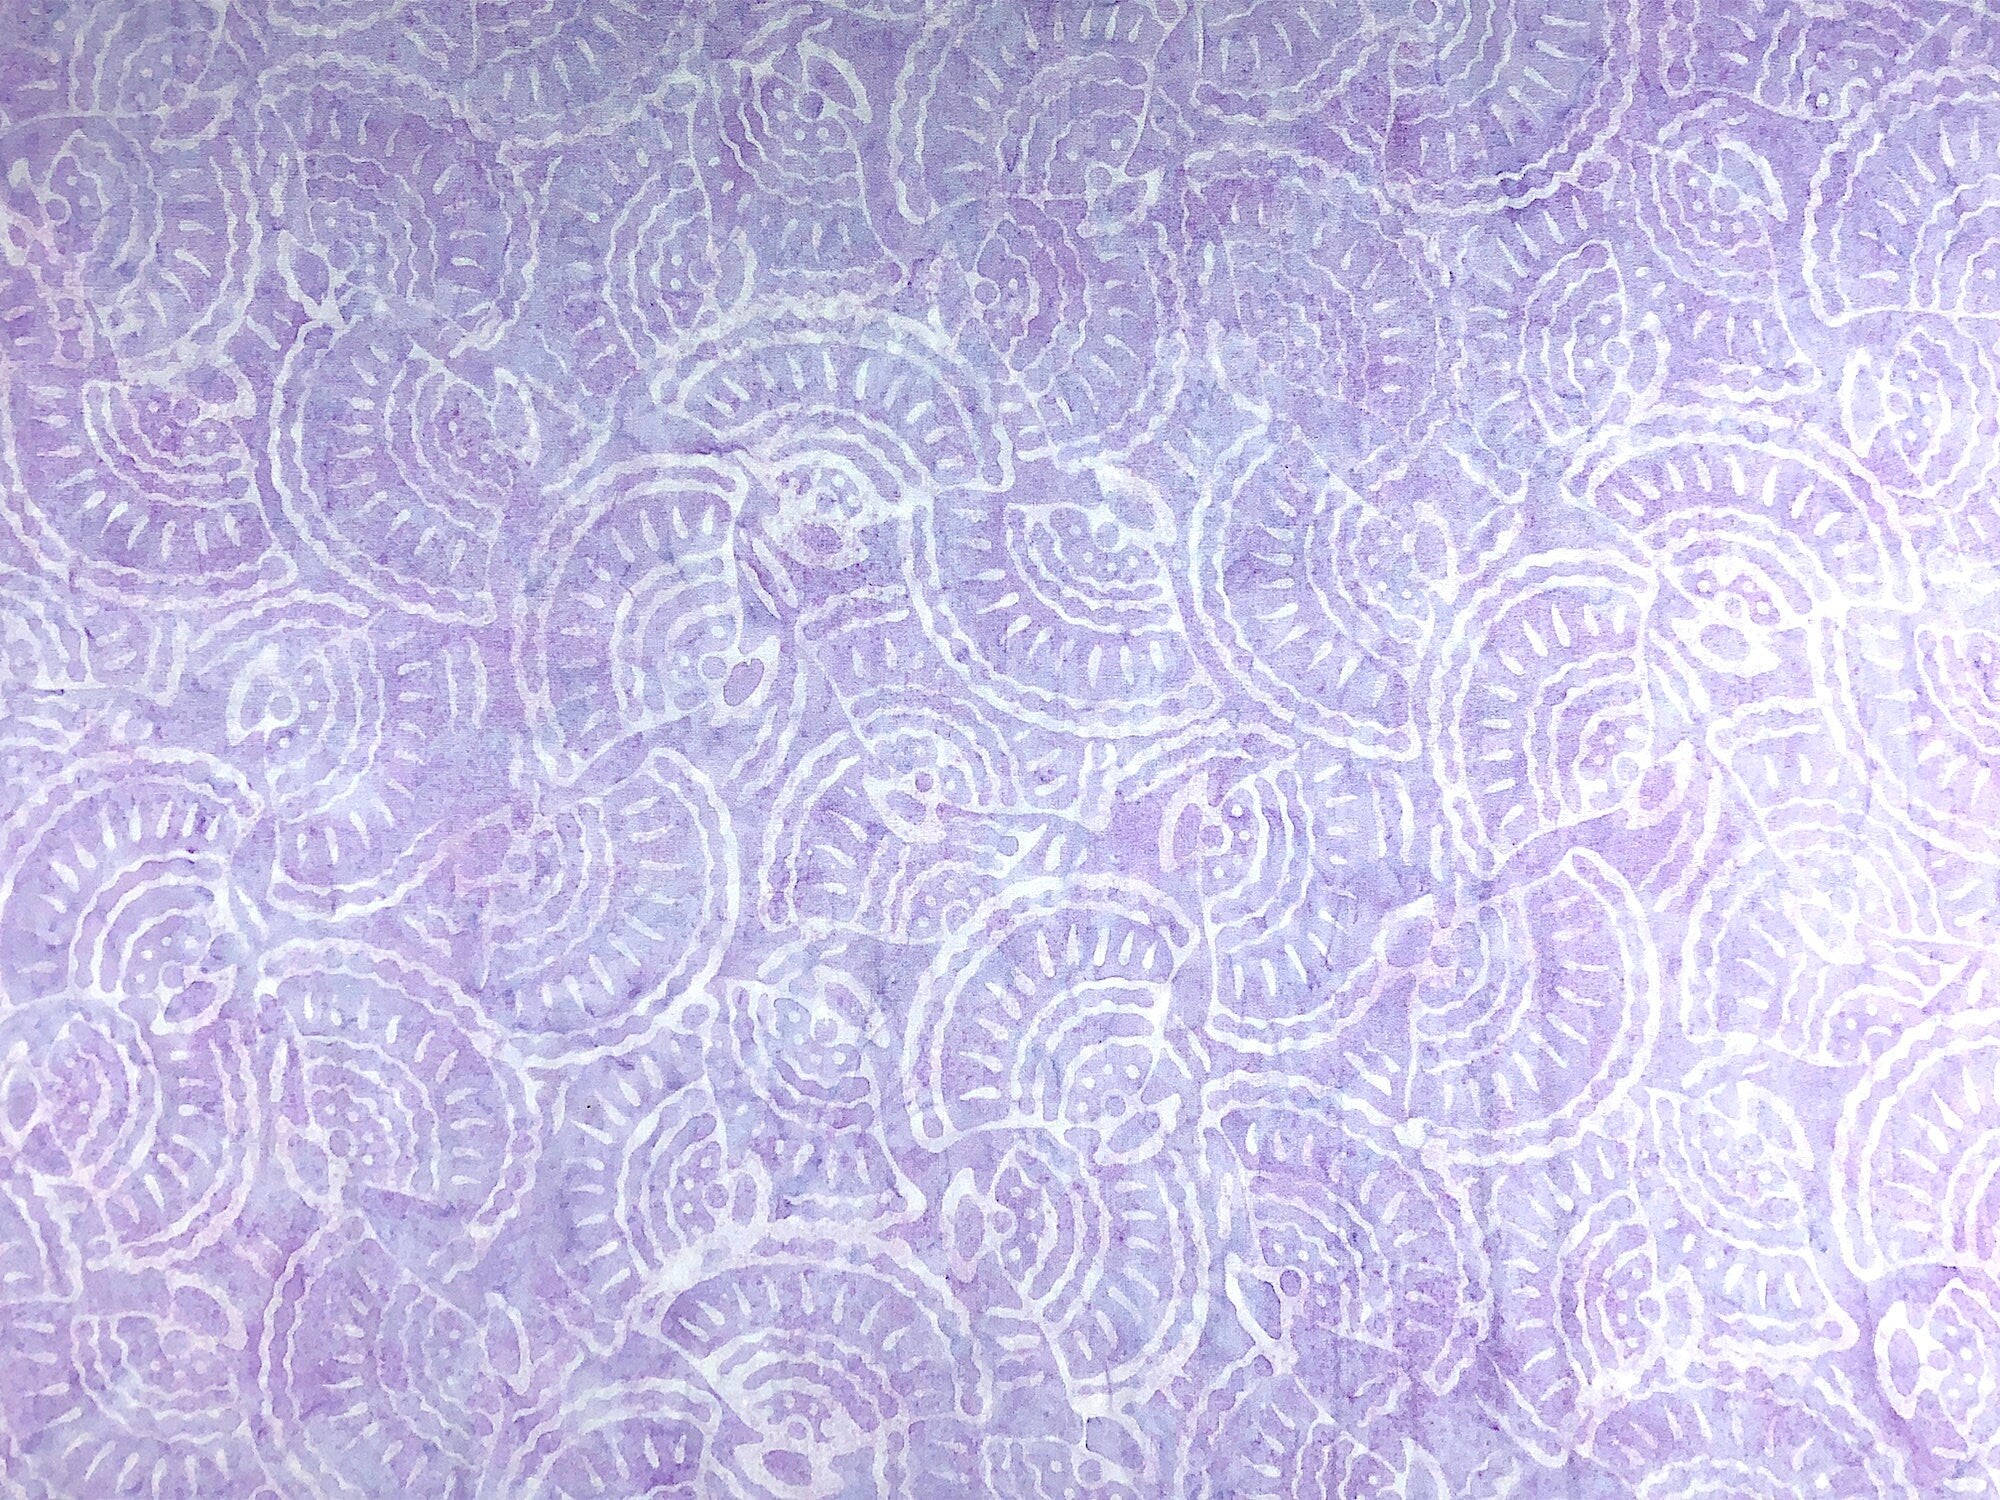 This lilac fabric is covered with seashells of a lighter lilac color.